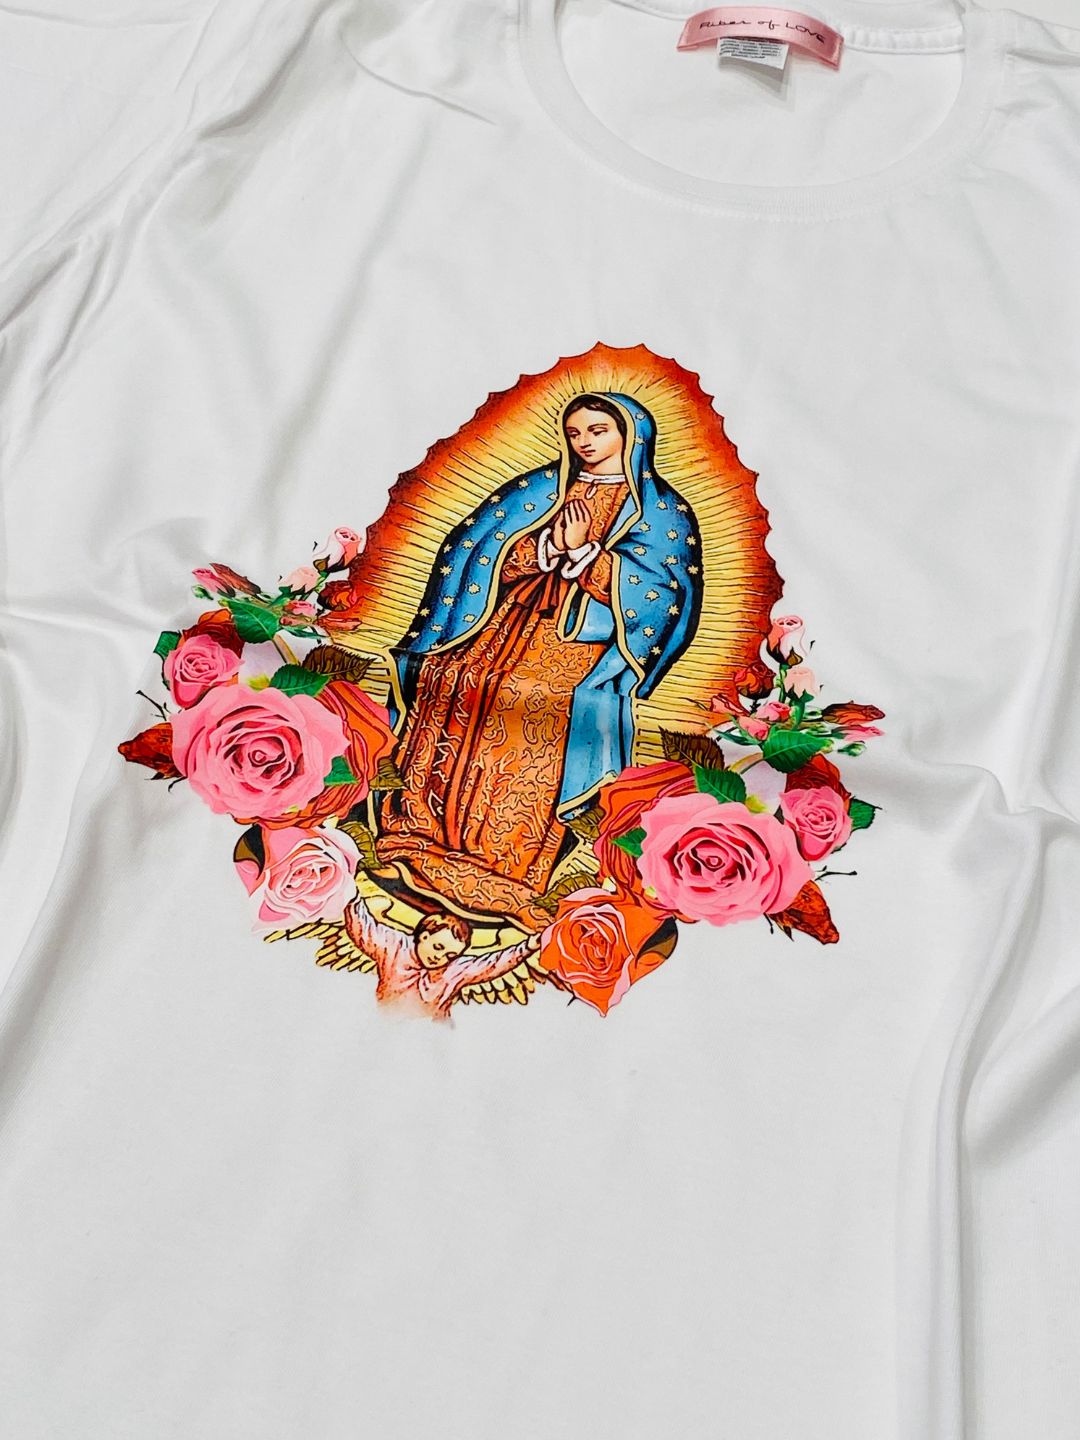 T-SHIRT MADONNA DI GUADALUPE Mod.1 Ribes of LOVE